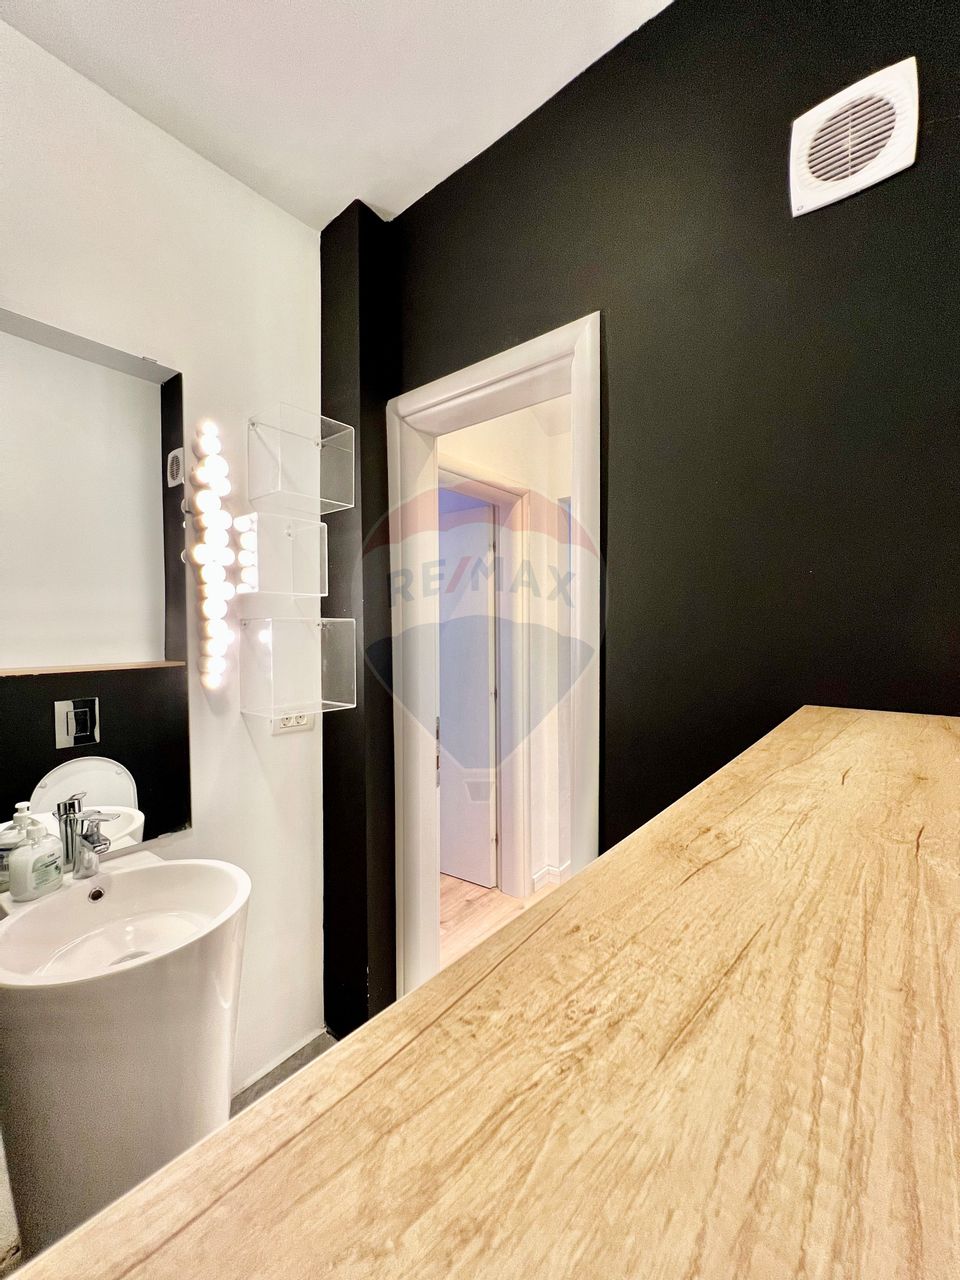 Downtown, boutique hotel apartment 2 rooms, LUX, furniture Italy